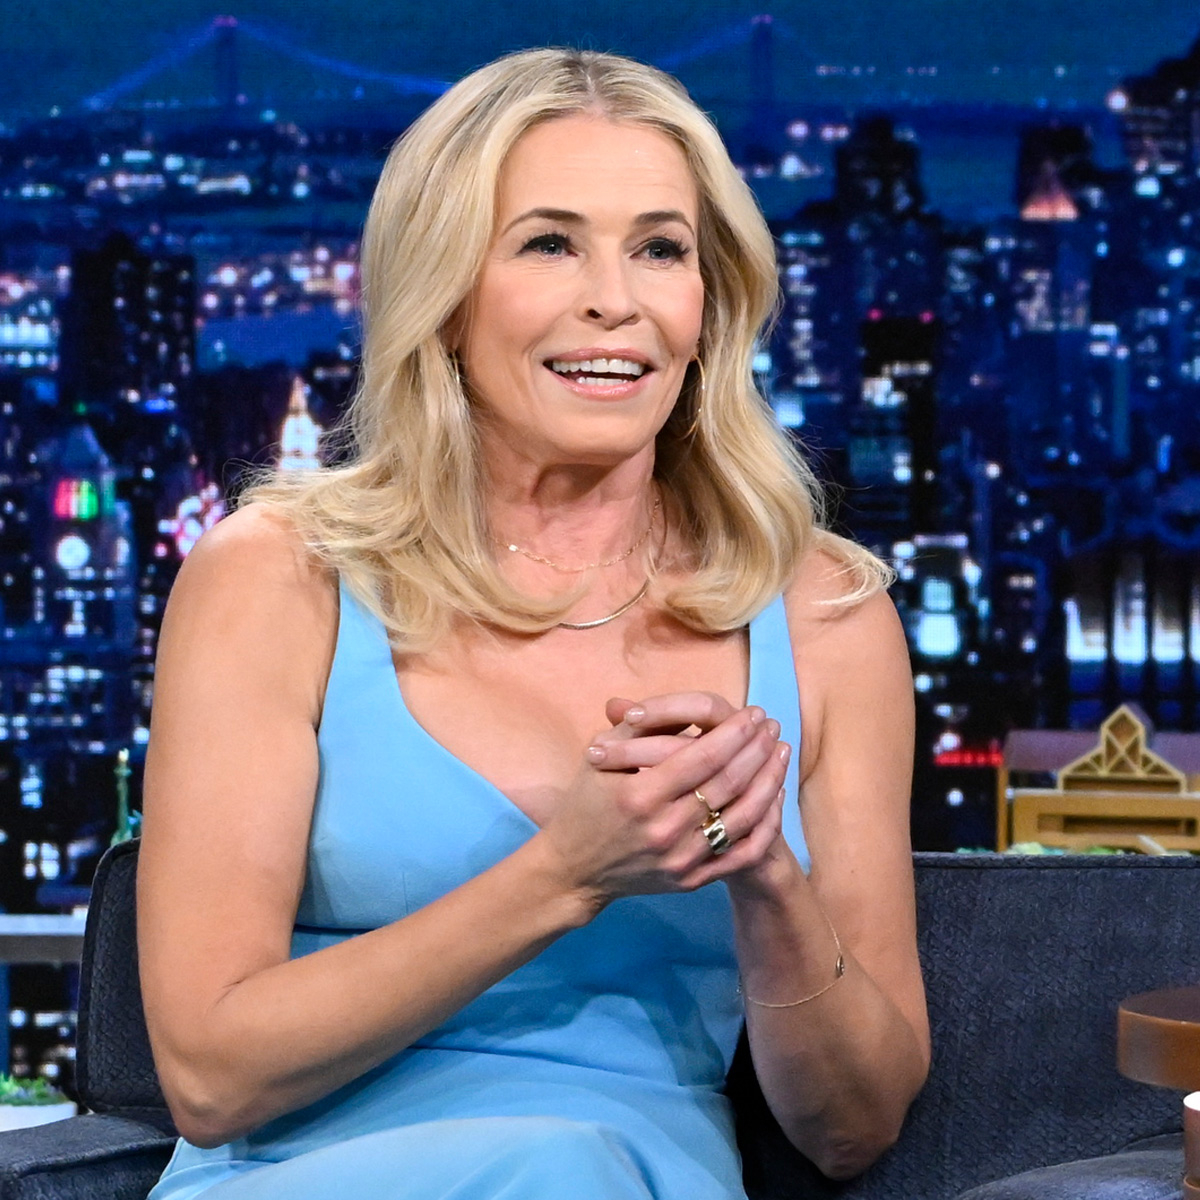 How Chelsea Handler’s Threesome With a Masseuse Led to a Break Up